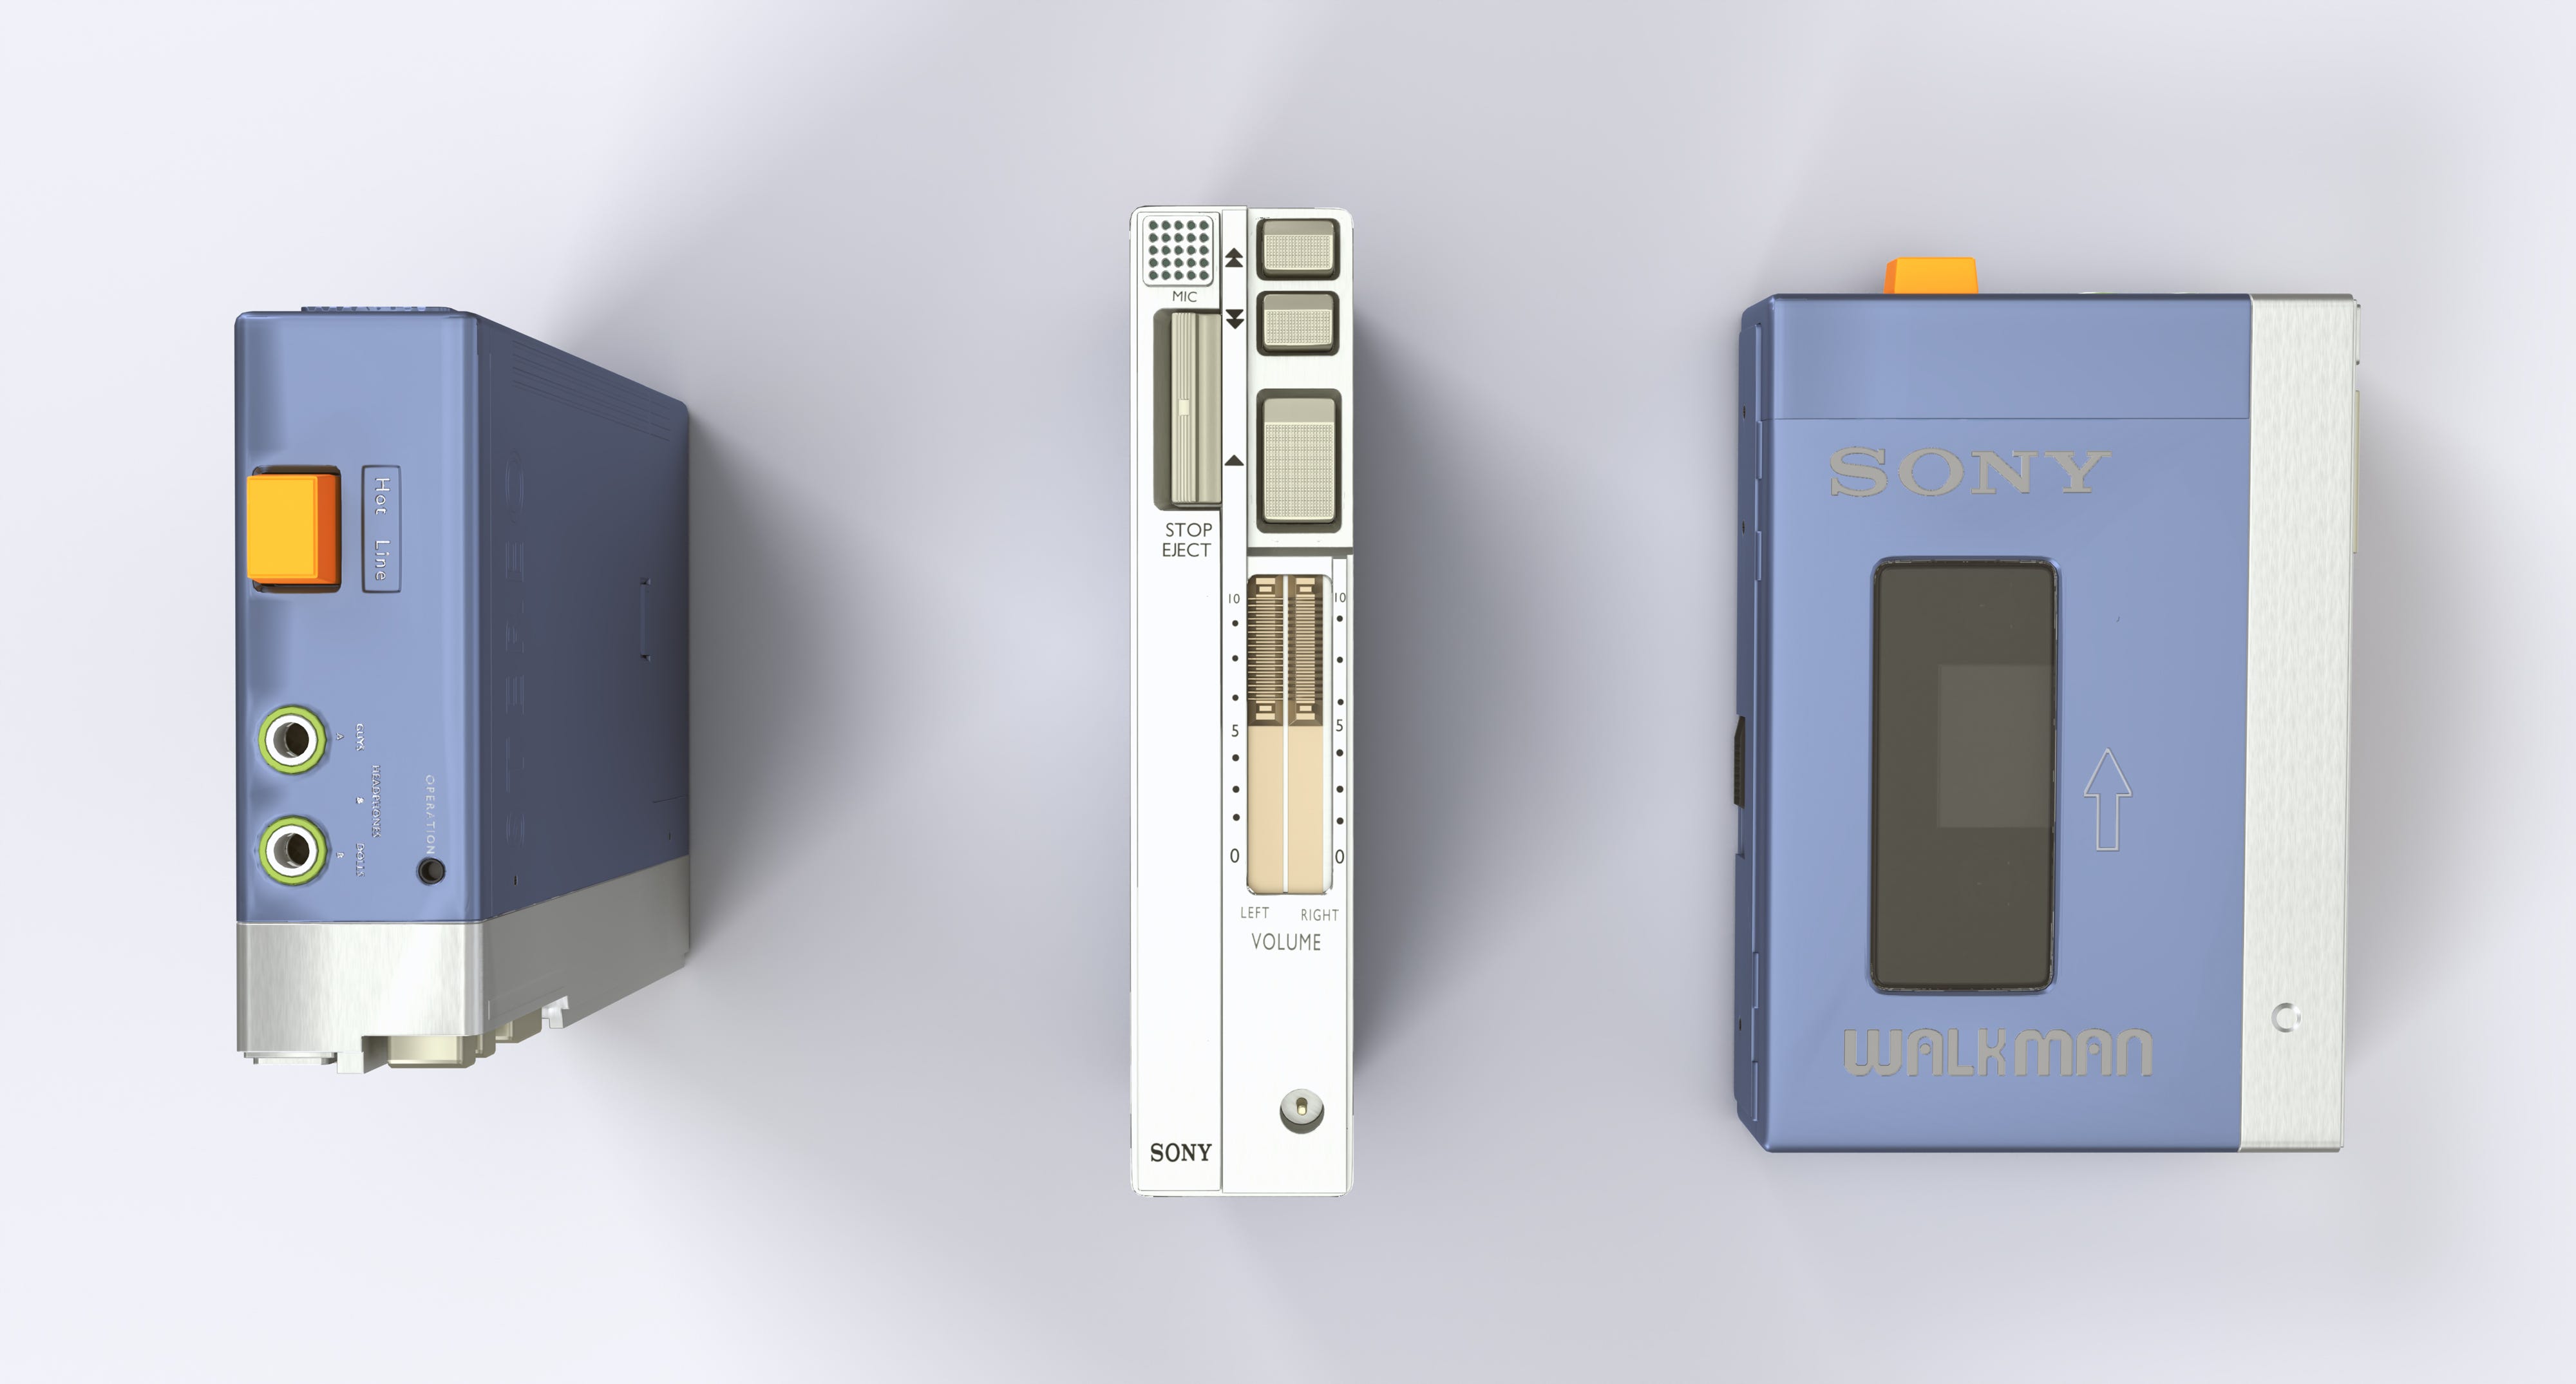 The Original Sony Walkman - A Timeless Tune in Product Design